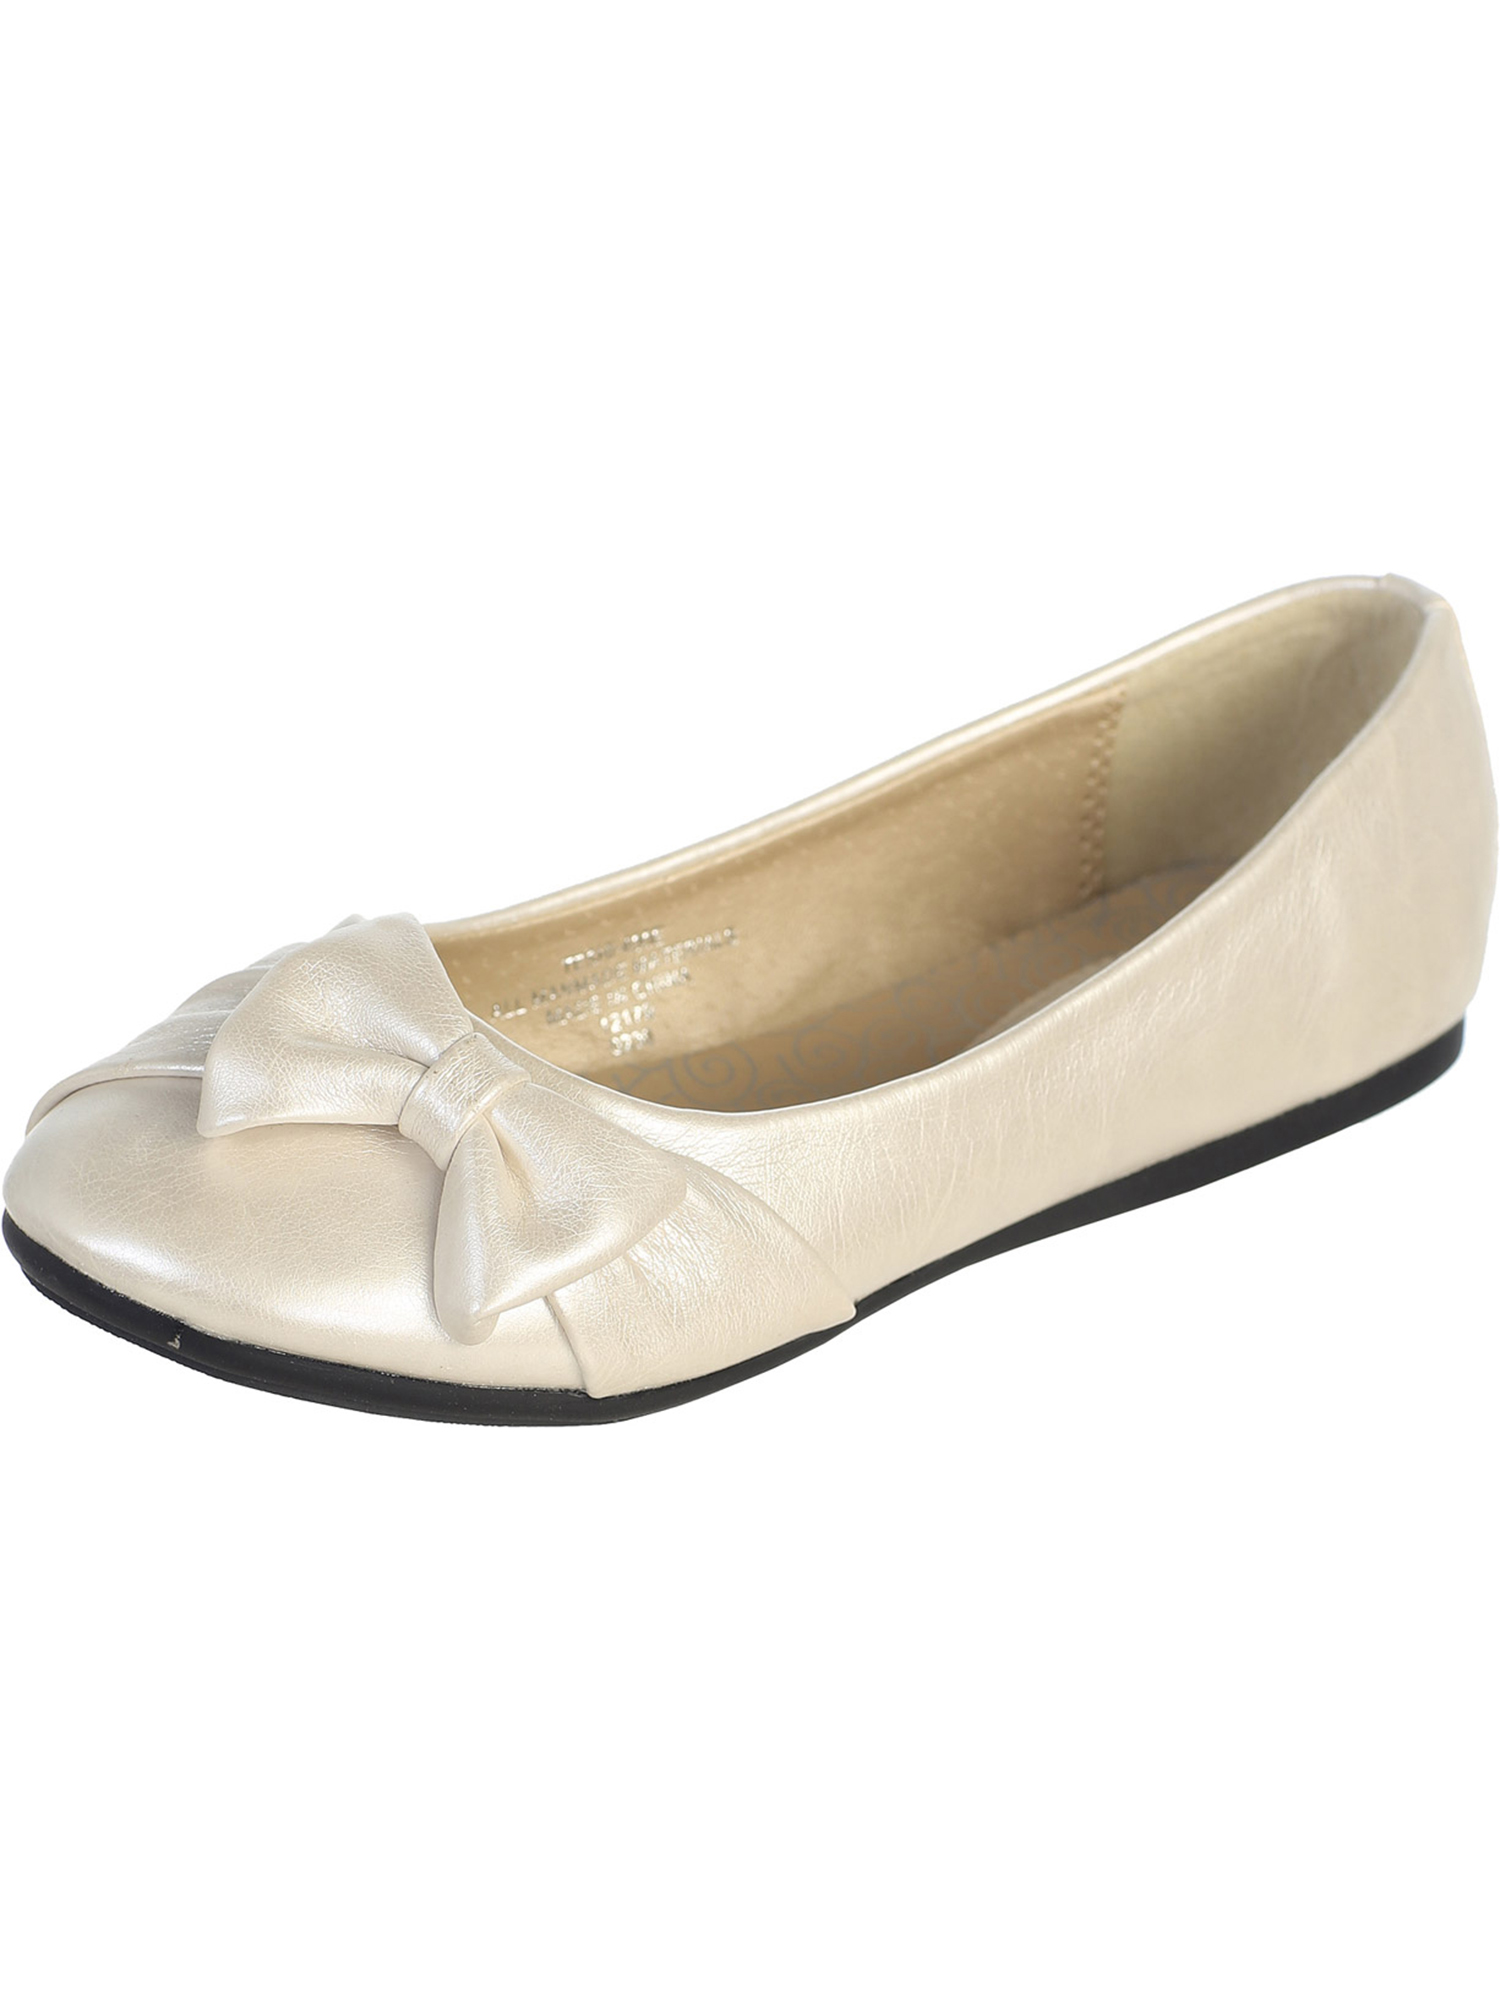 Ivory Pearl Girl's Flat Shoes with Side Bow Girl 1